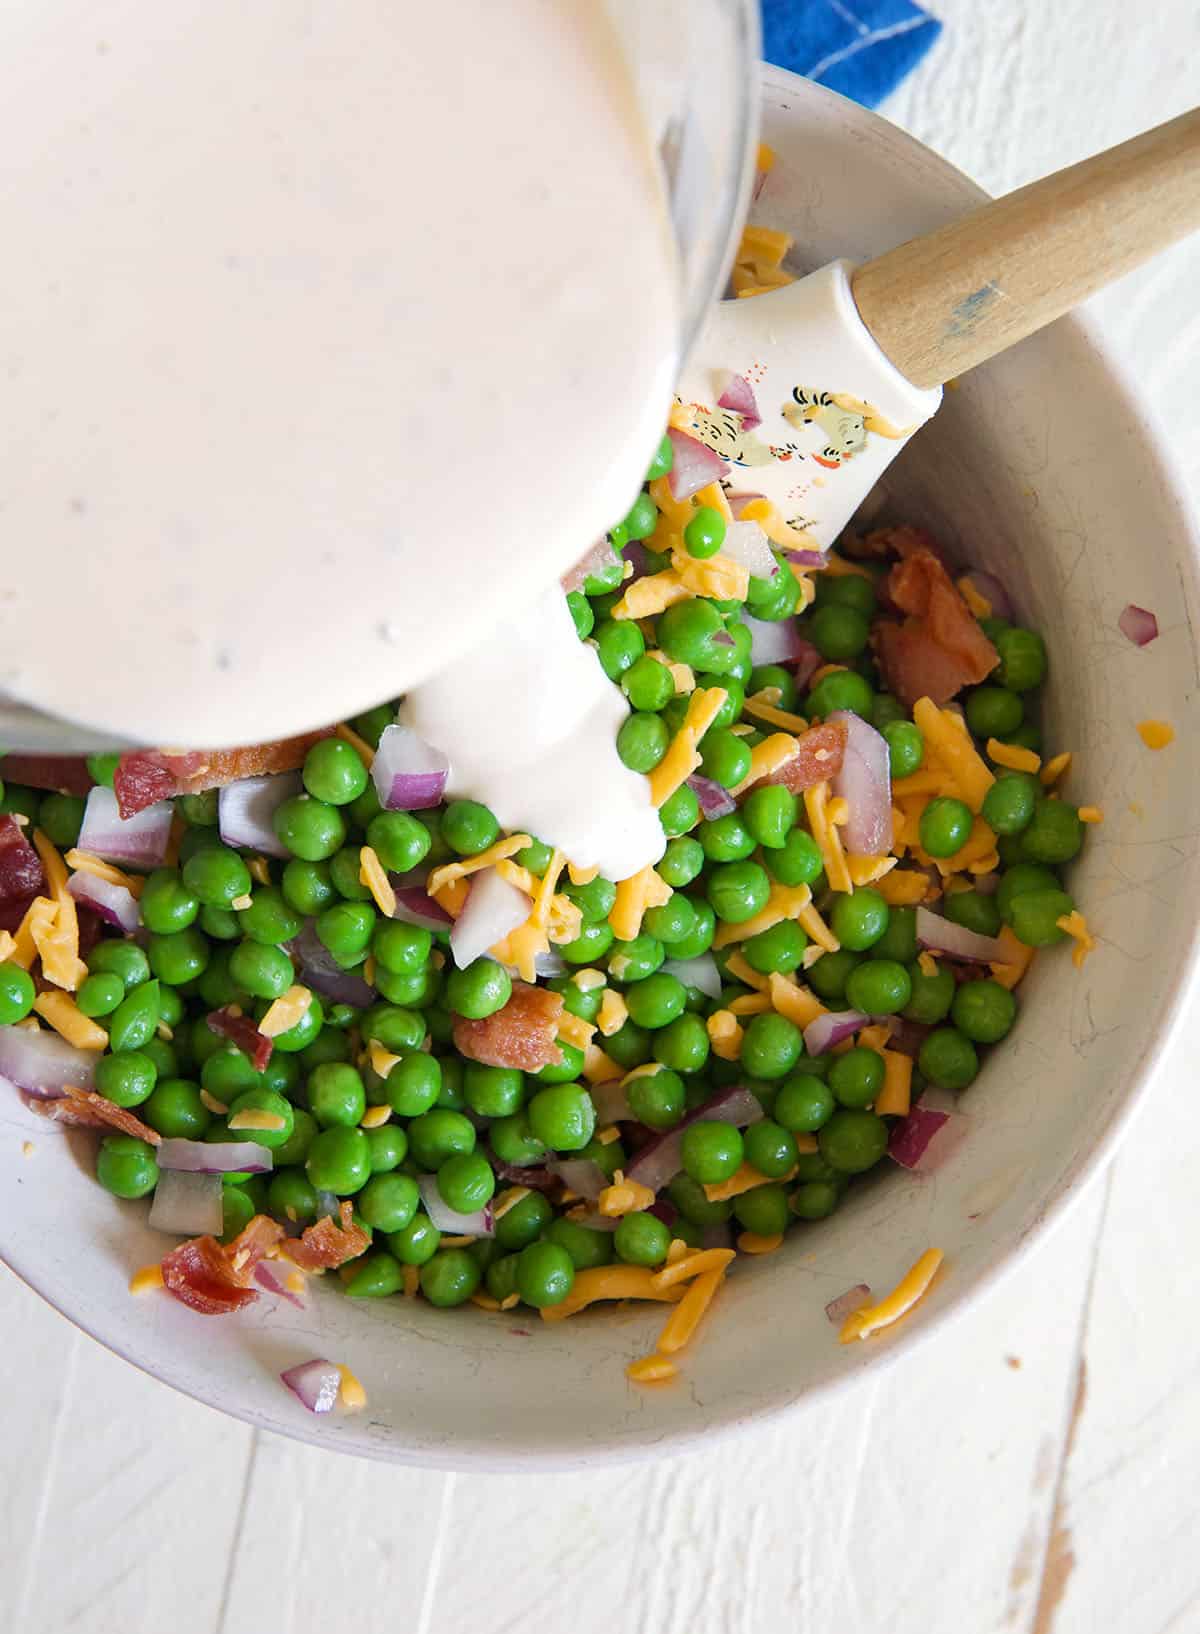 Dressing is being poured into a bowl of tossed pea salad.